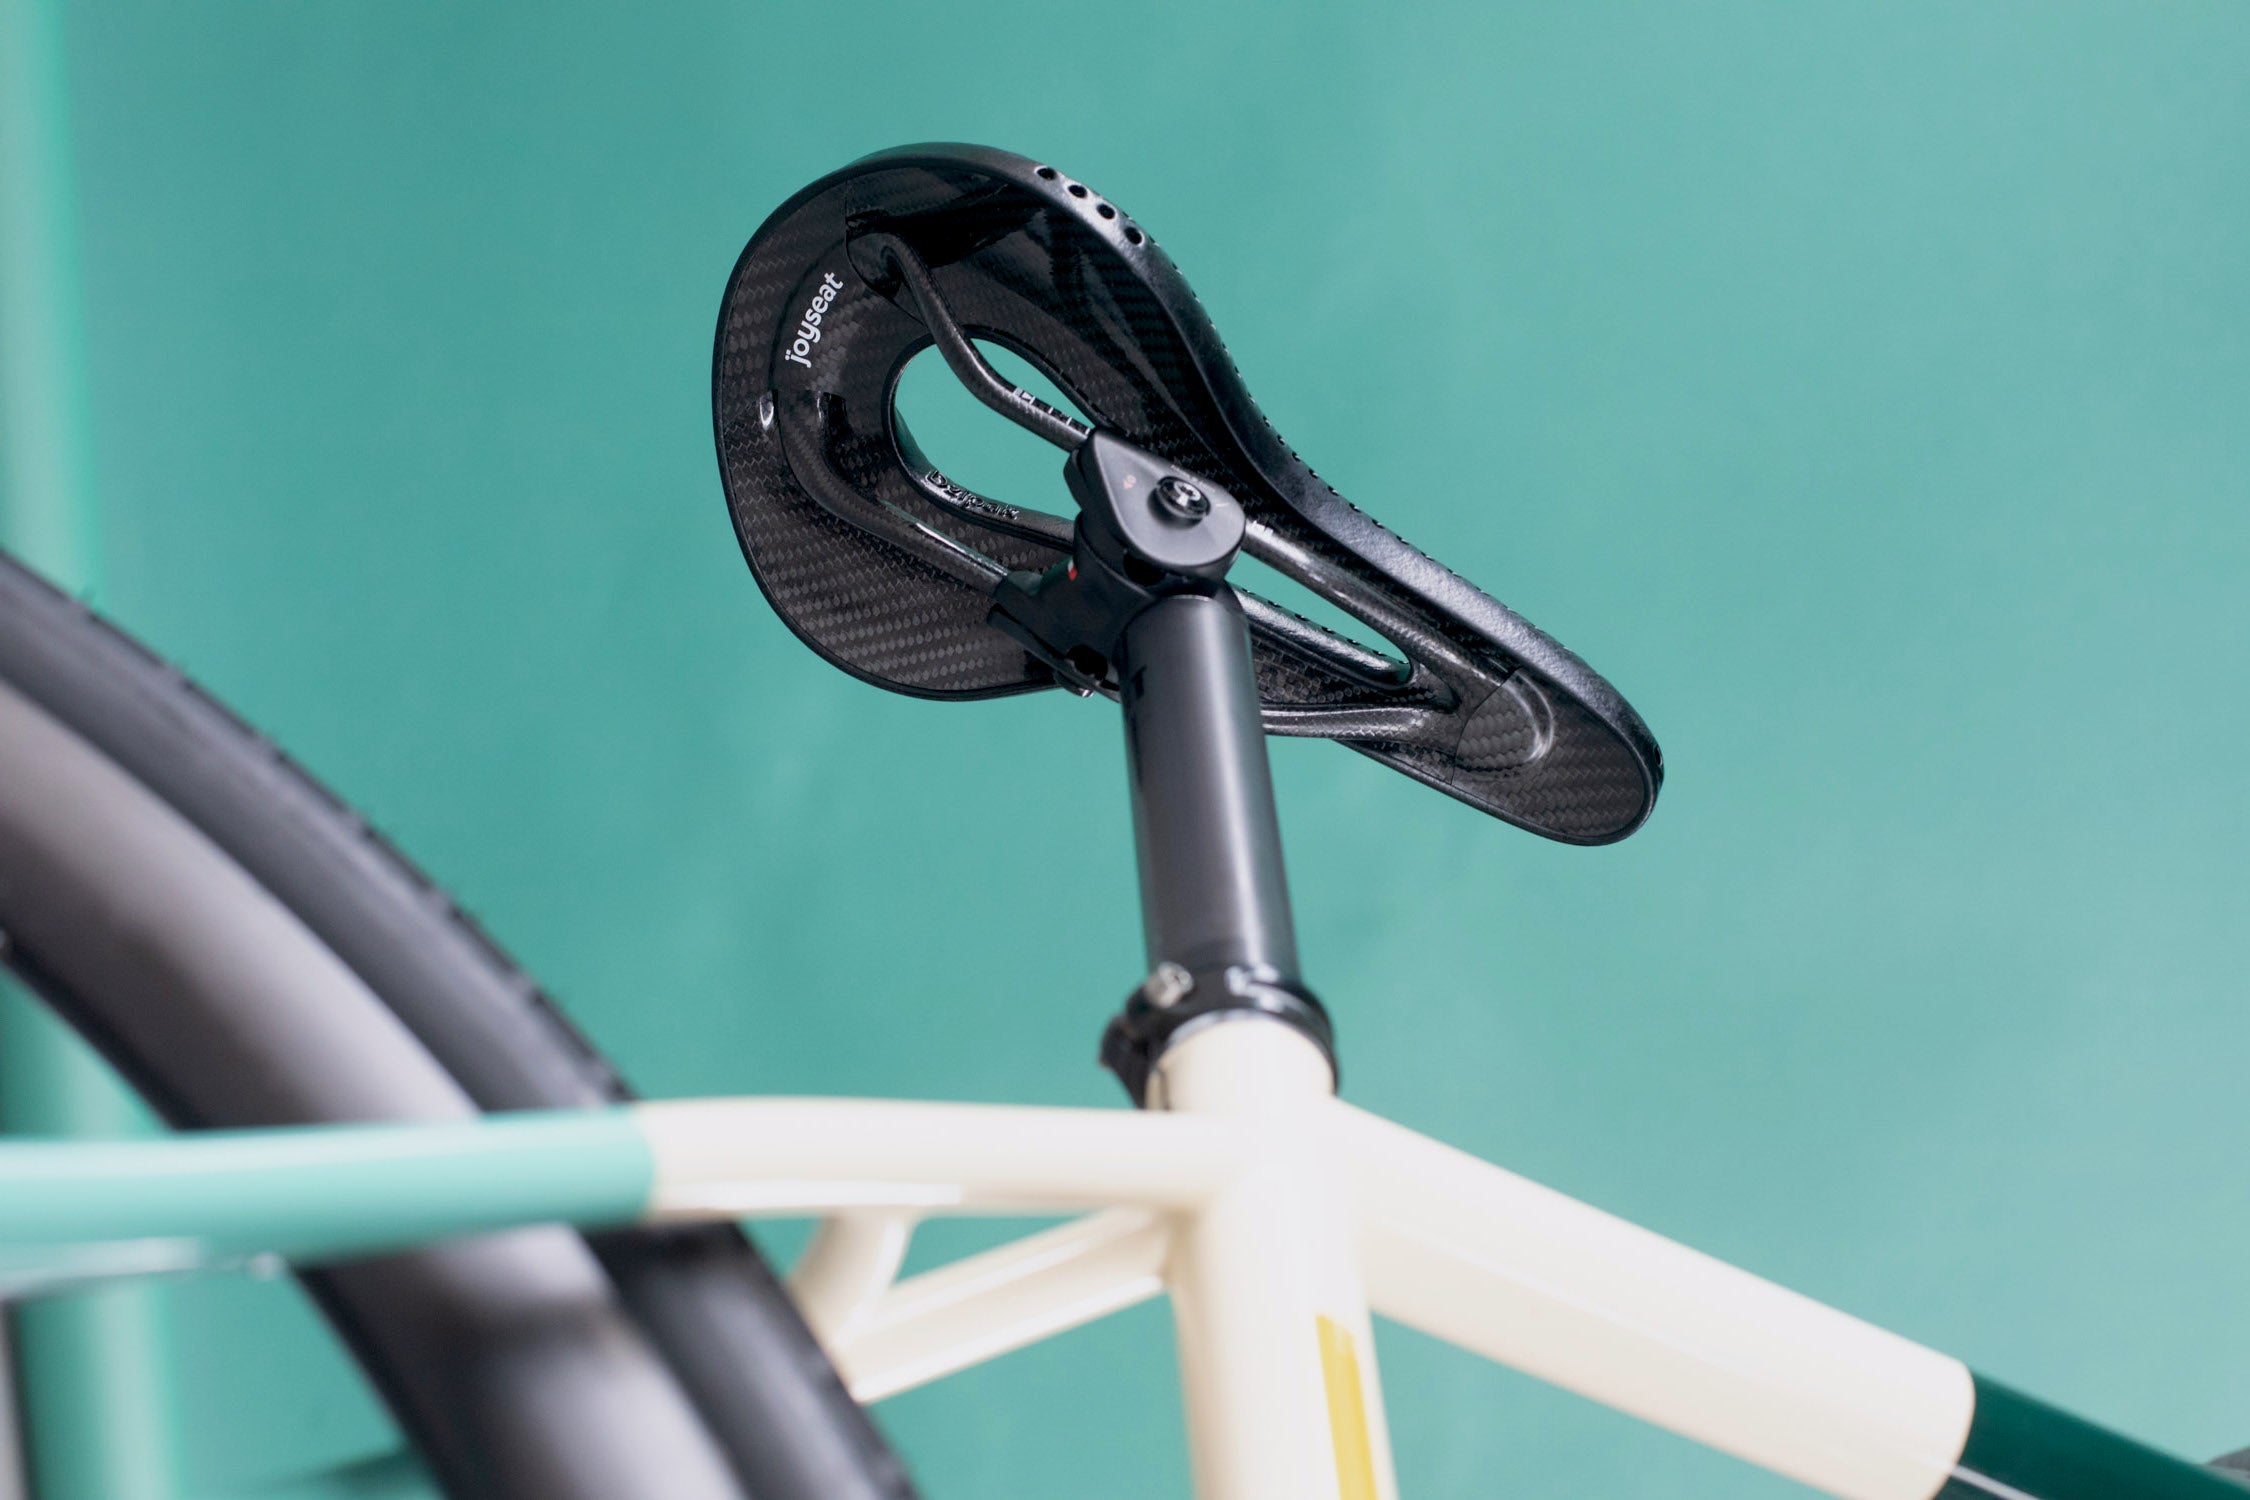 Recommended Clamps and Seatposts for Joyseat Saddle Carbon Rails